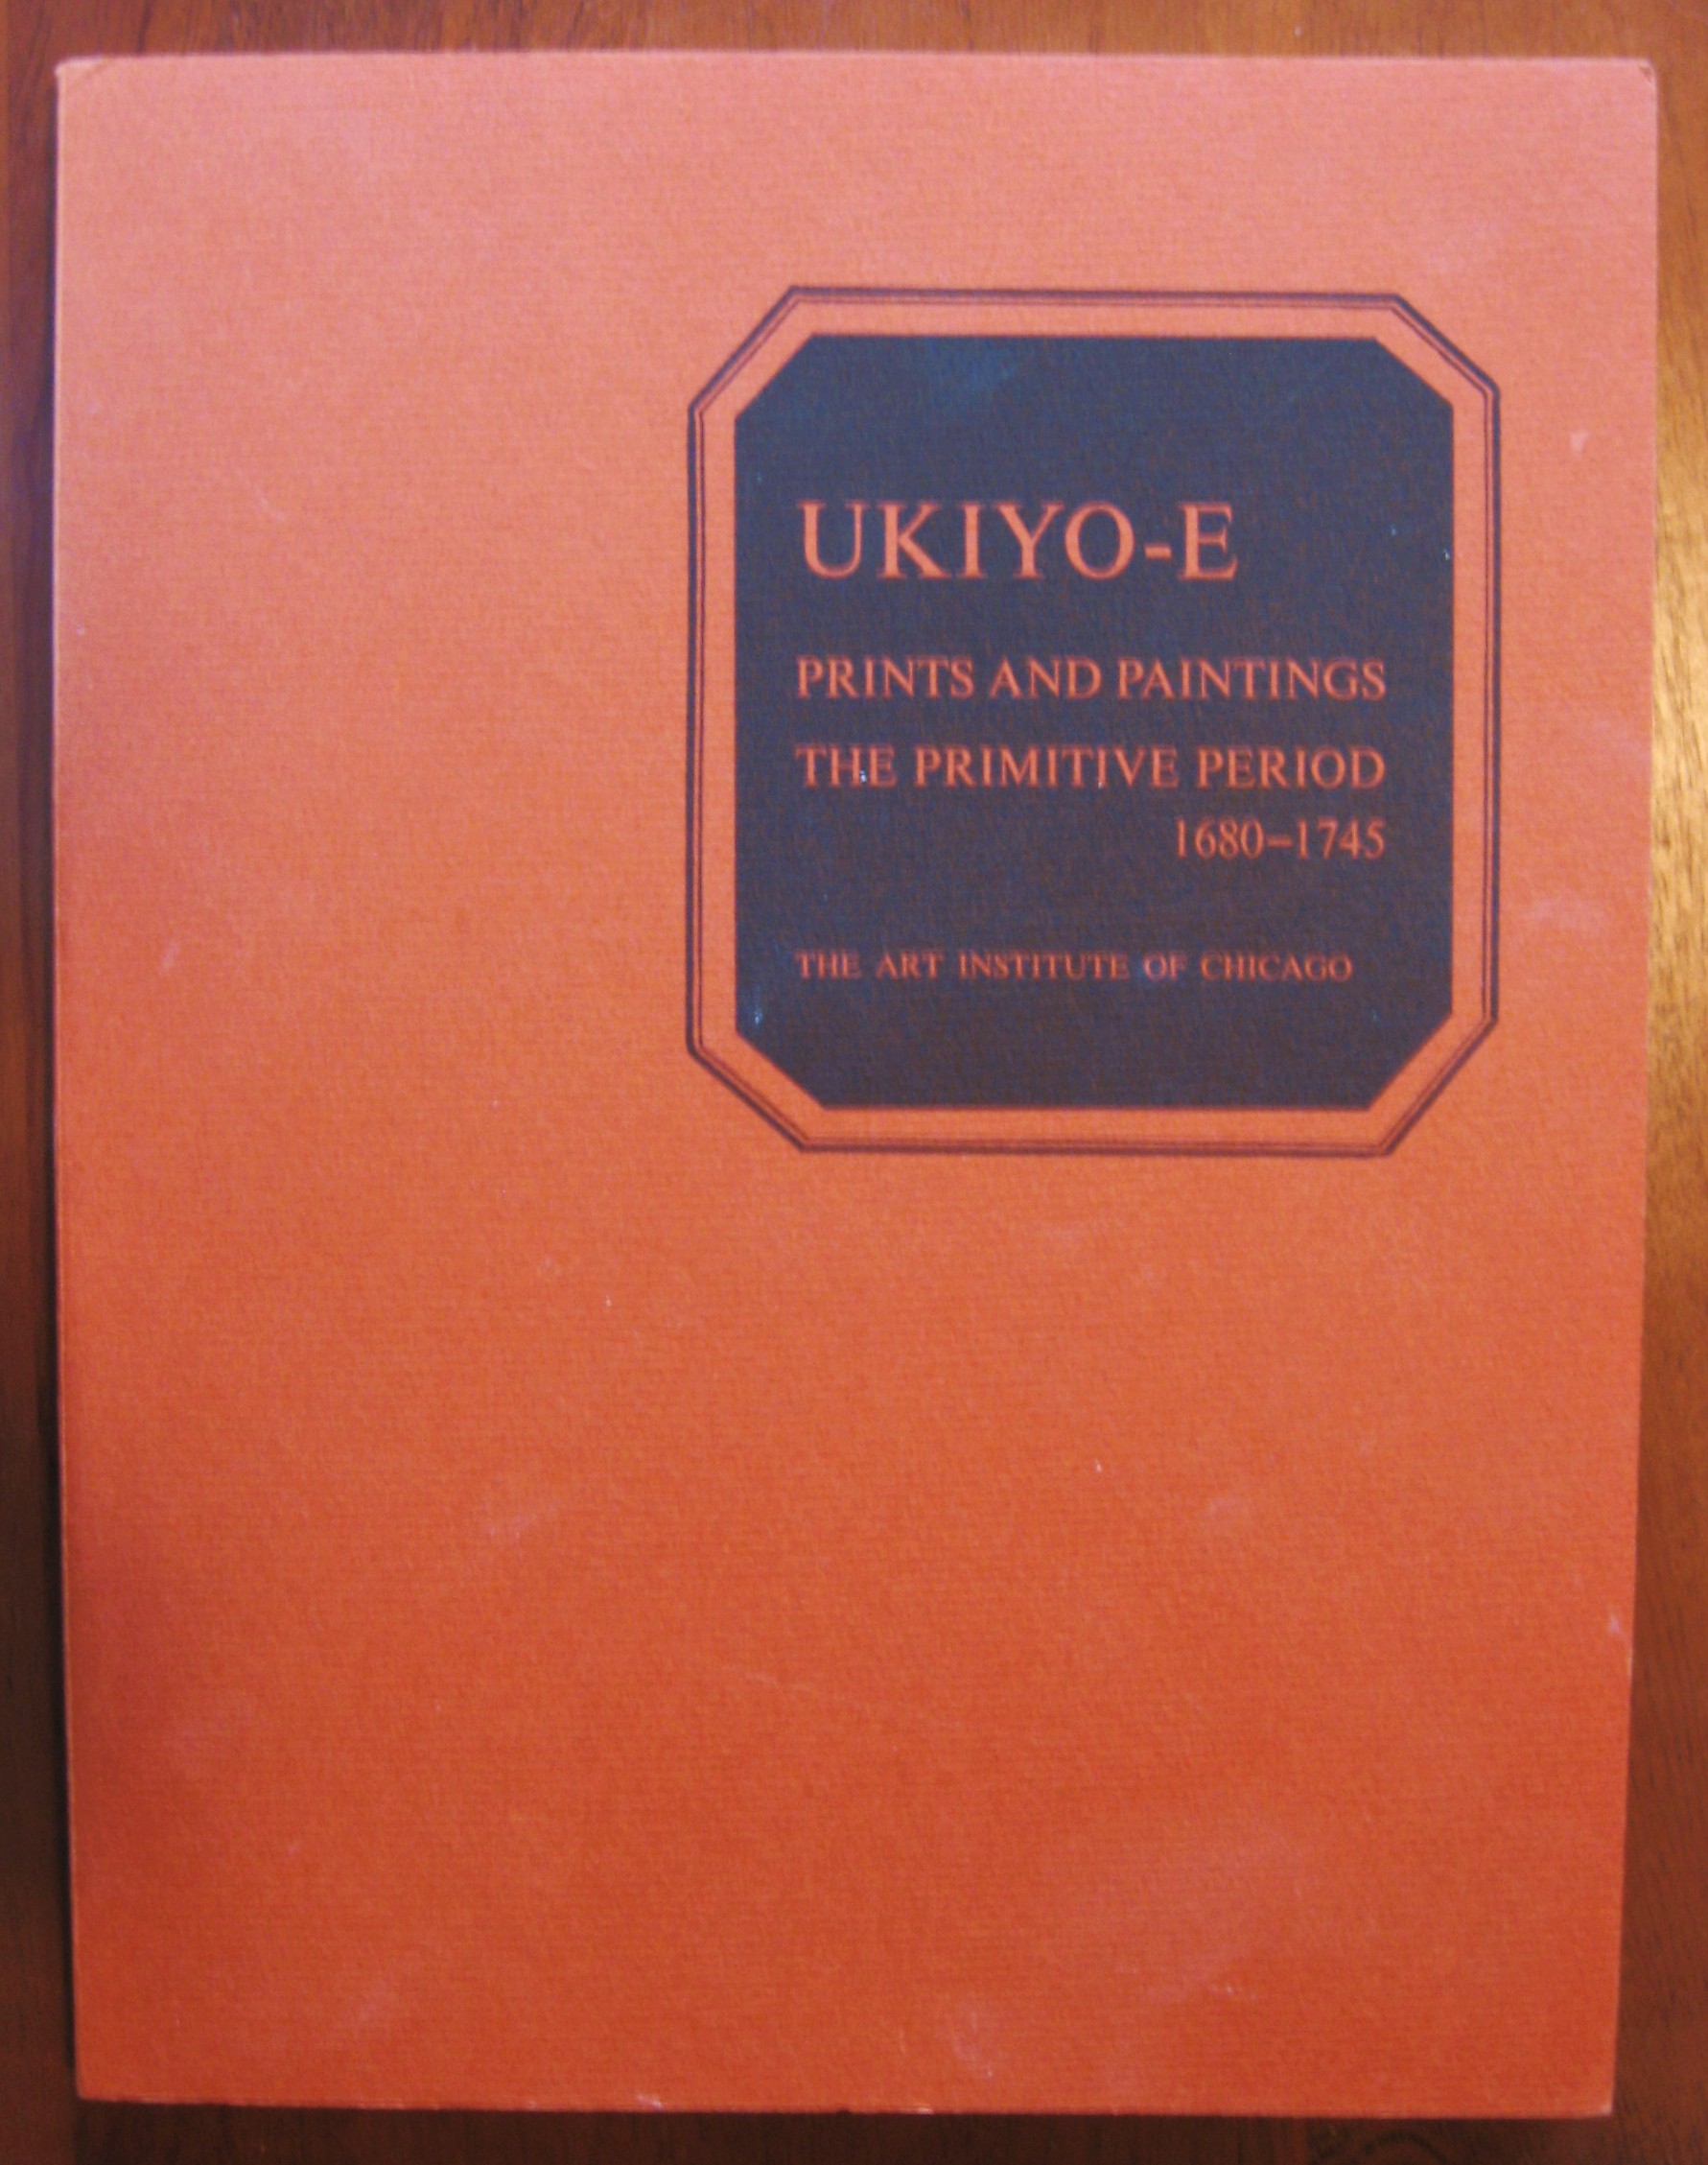 UKIYO-E Prints and Paintings The Primitive Period